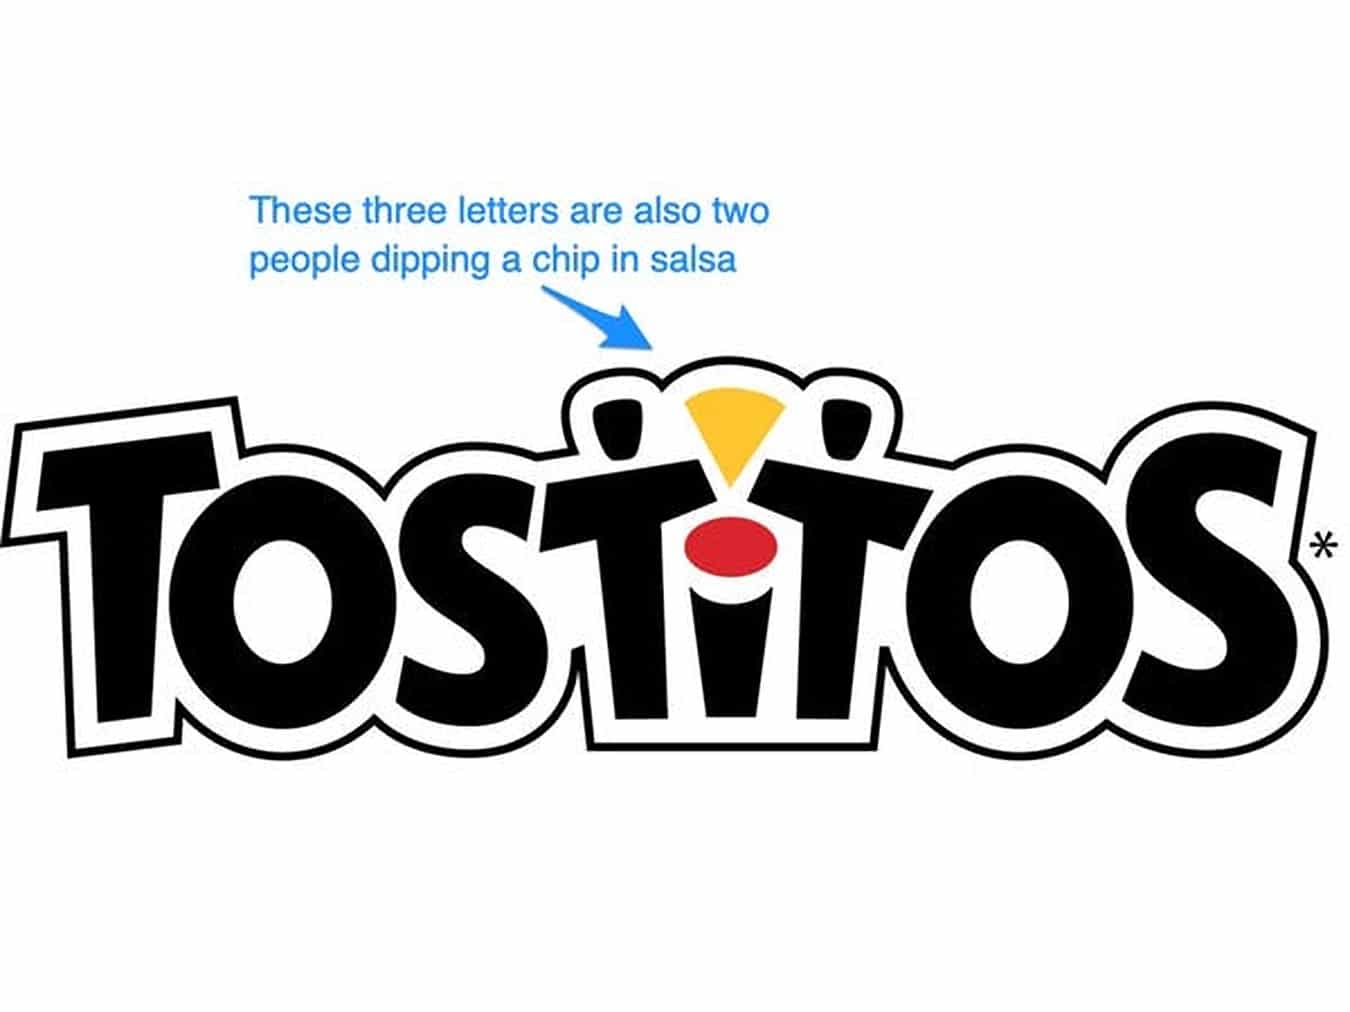 Subliminal advertising is Tostitos logo